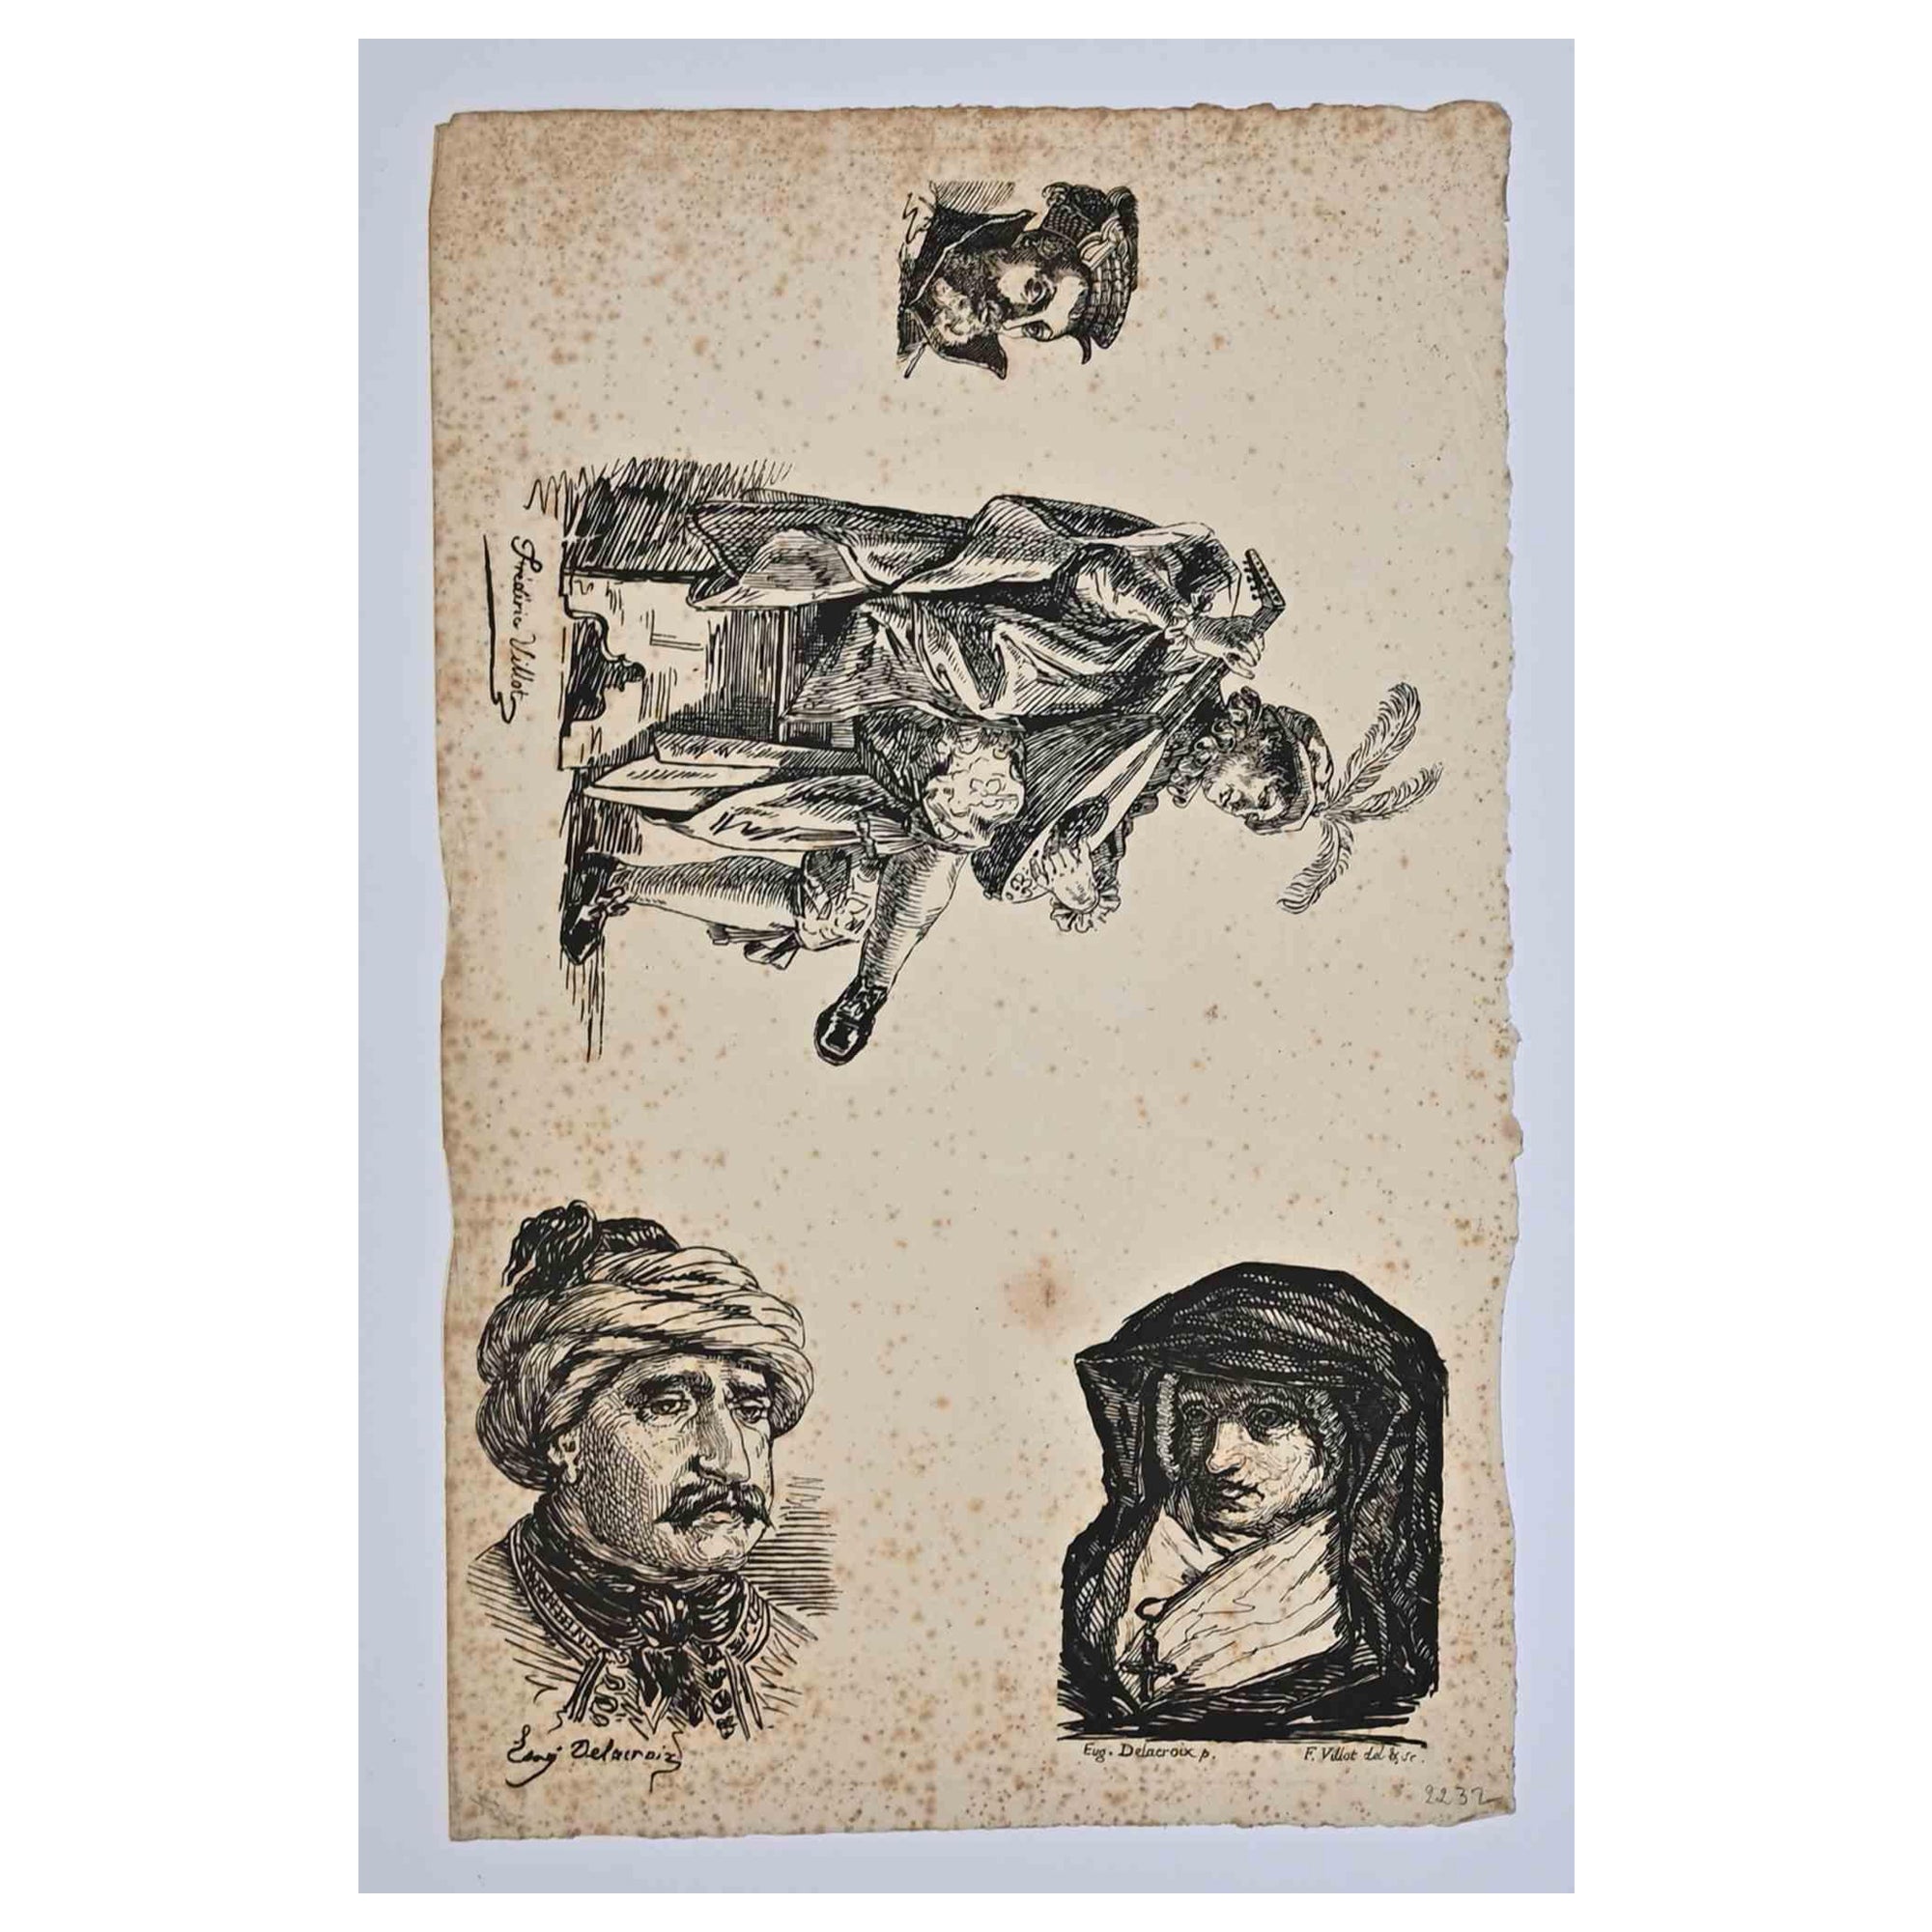 Portraits is an etching realized by Frédéric Villot (1809-1875) after Eugène Delacroix.

Good condition on a yellowed paper, included a white cardboard passpartout ( 64x51 cm).

Hand-signed by the artist on the margins.

The artwork represents three